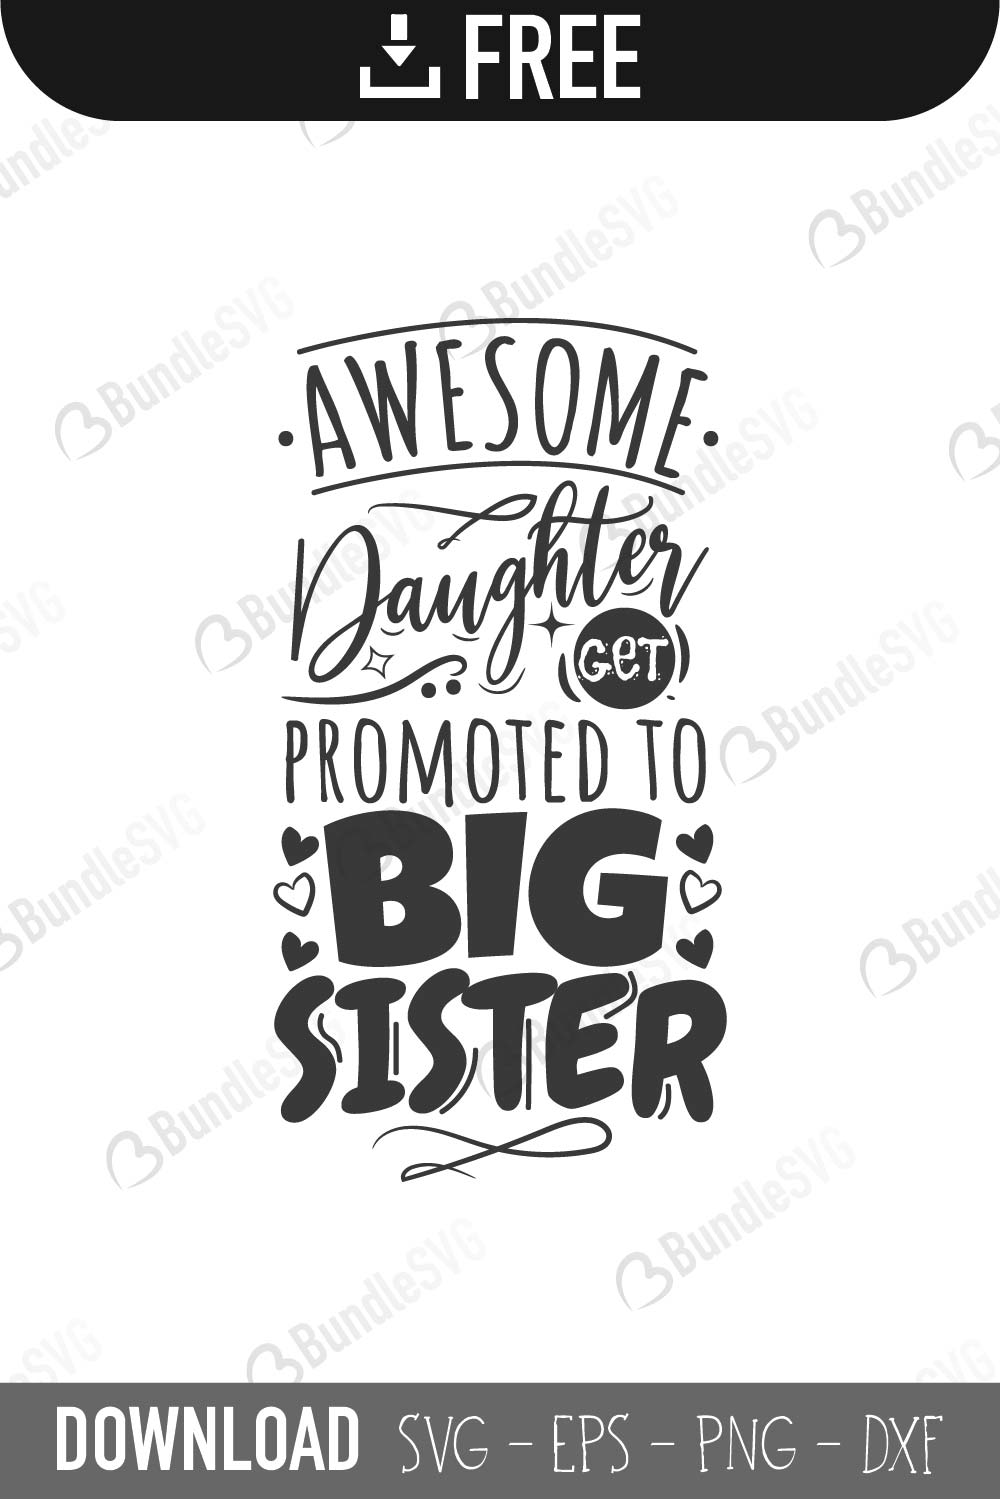 promoted-to-big-sister-svg-cut-file-by-svgenthusiast-thehungryjpeg